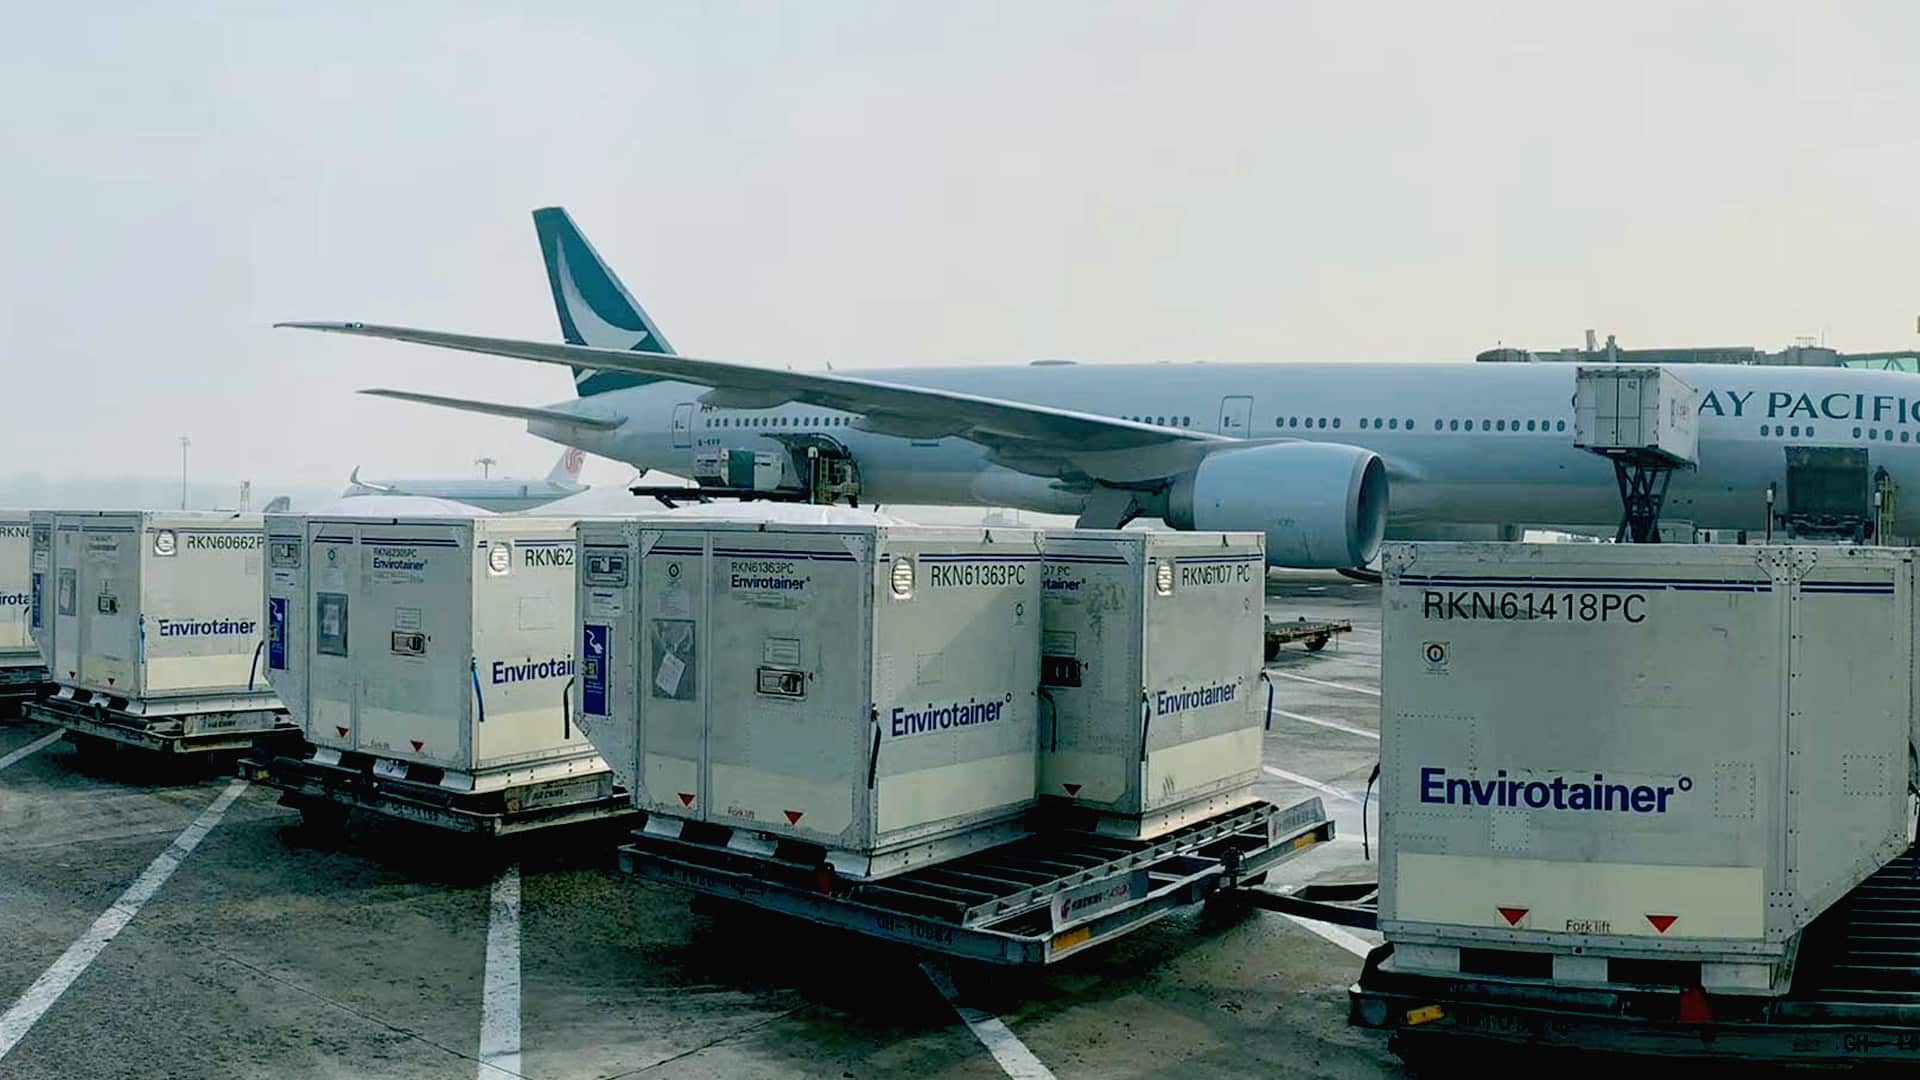 Bengaluru airport ties up with Envirotainer for temperature-controlled cargo solution